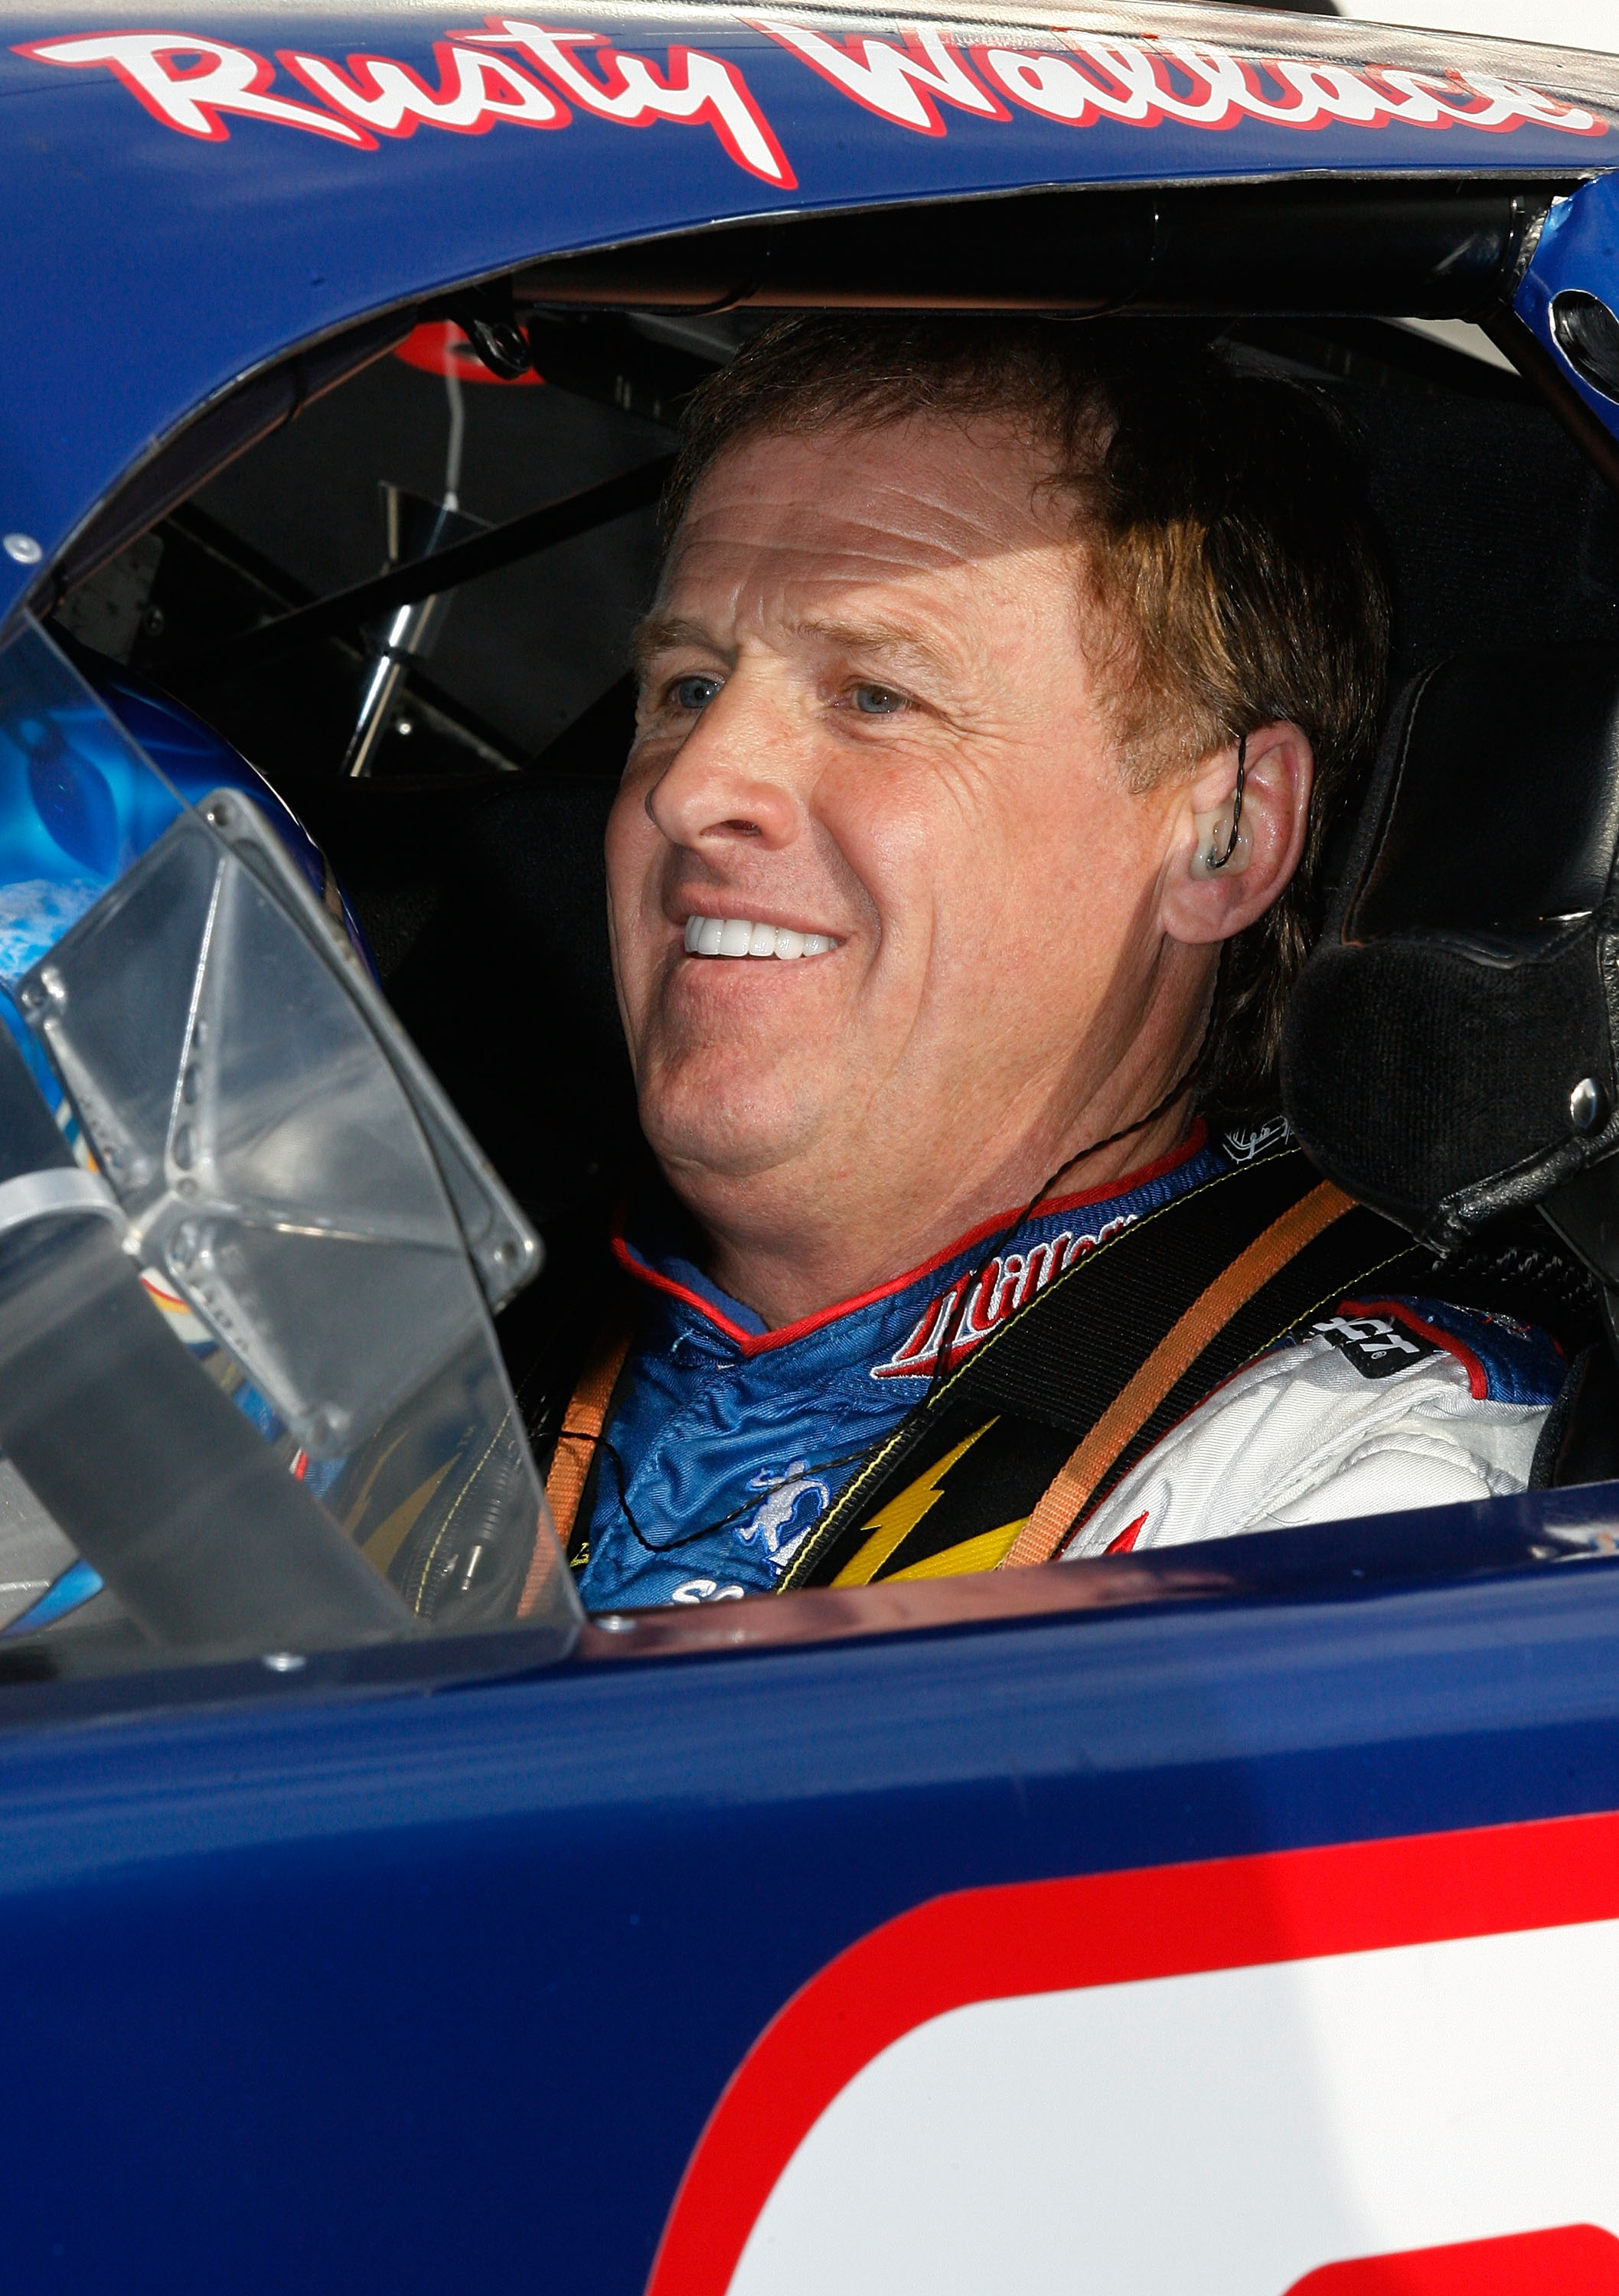 BRISTOL, TN - MARCH 21: NASCAR past champion Rusty Wallace sits in his car prior to the NASCAR Legends UARA Race at Bristol Motor Speedway on March 21, 2009 in Bristol, Tennessee.  (Photo by Geoff Burke/Getty Images for NASCAR)